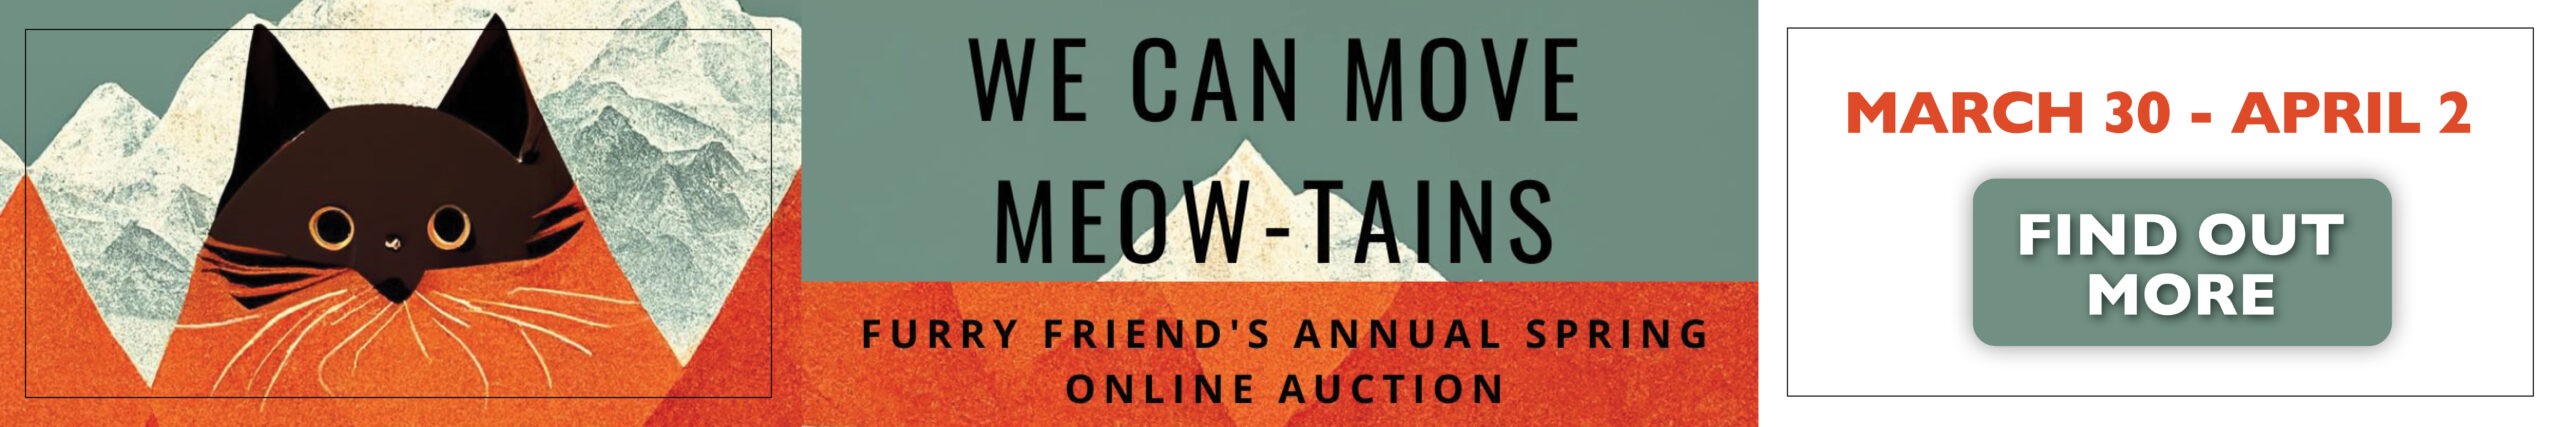 Spring Online Auction